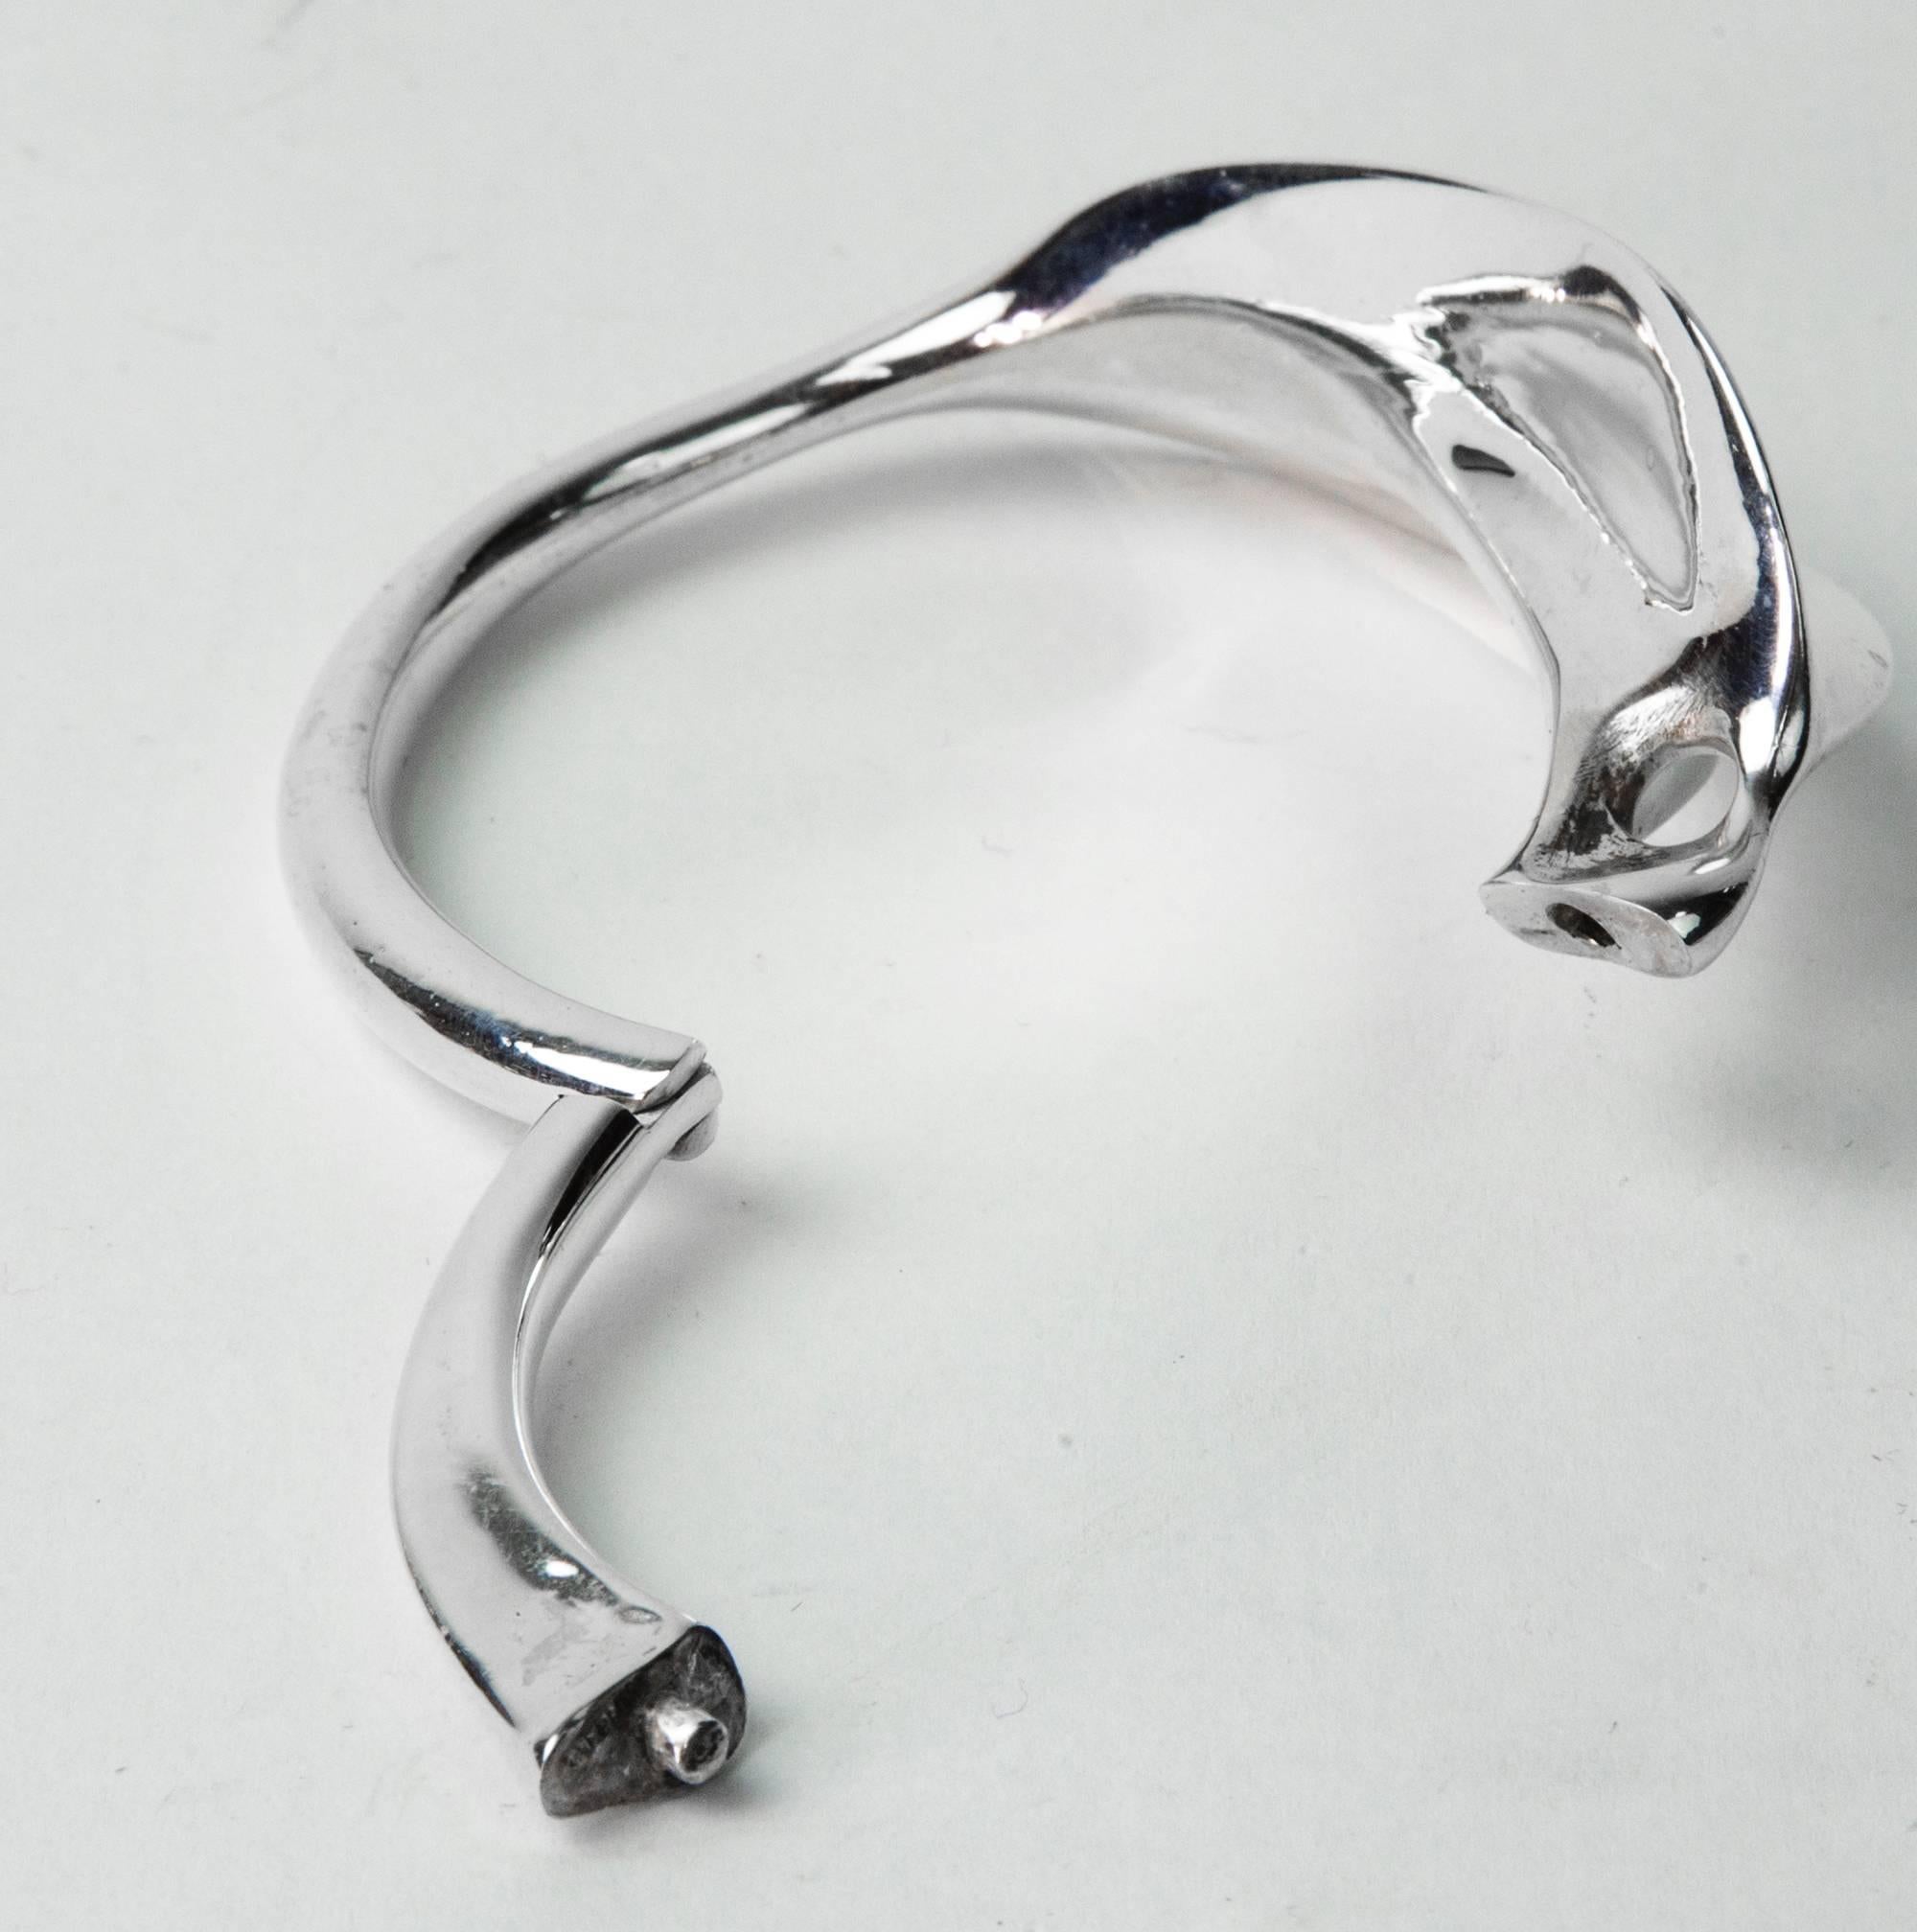 Vintage modernist sterling silver bracelet hand made in beautiful  free form organic design. The hidden clasp holds securely. Fits small to medium wrist.